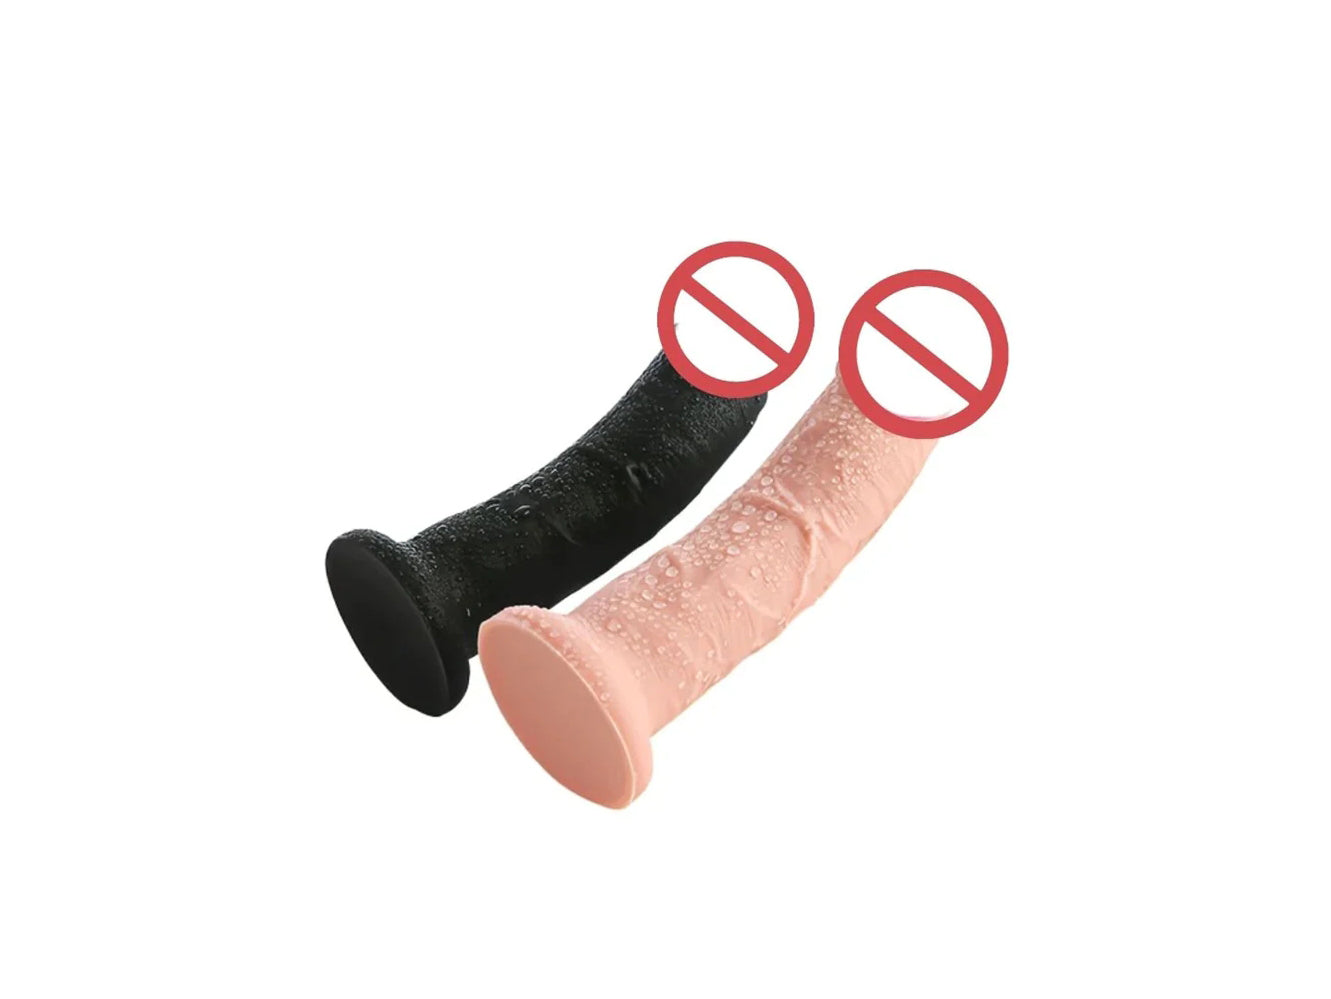 Empower Your Play: Realistic Dildo for Sale - Where Pleasure Meets Practicality